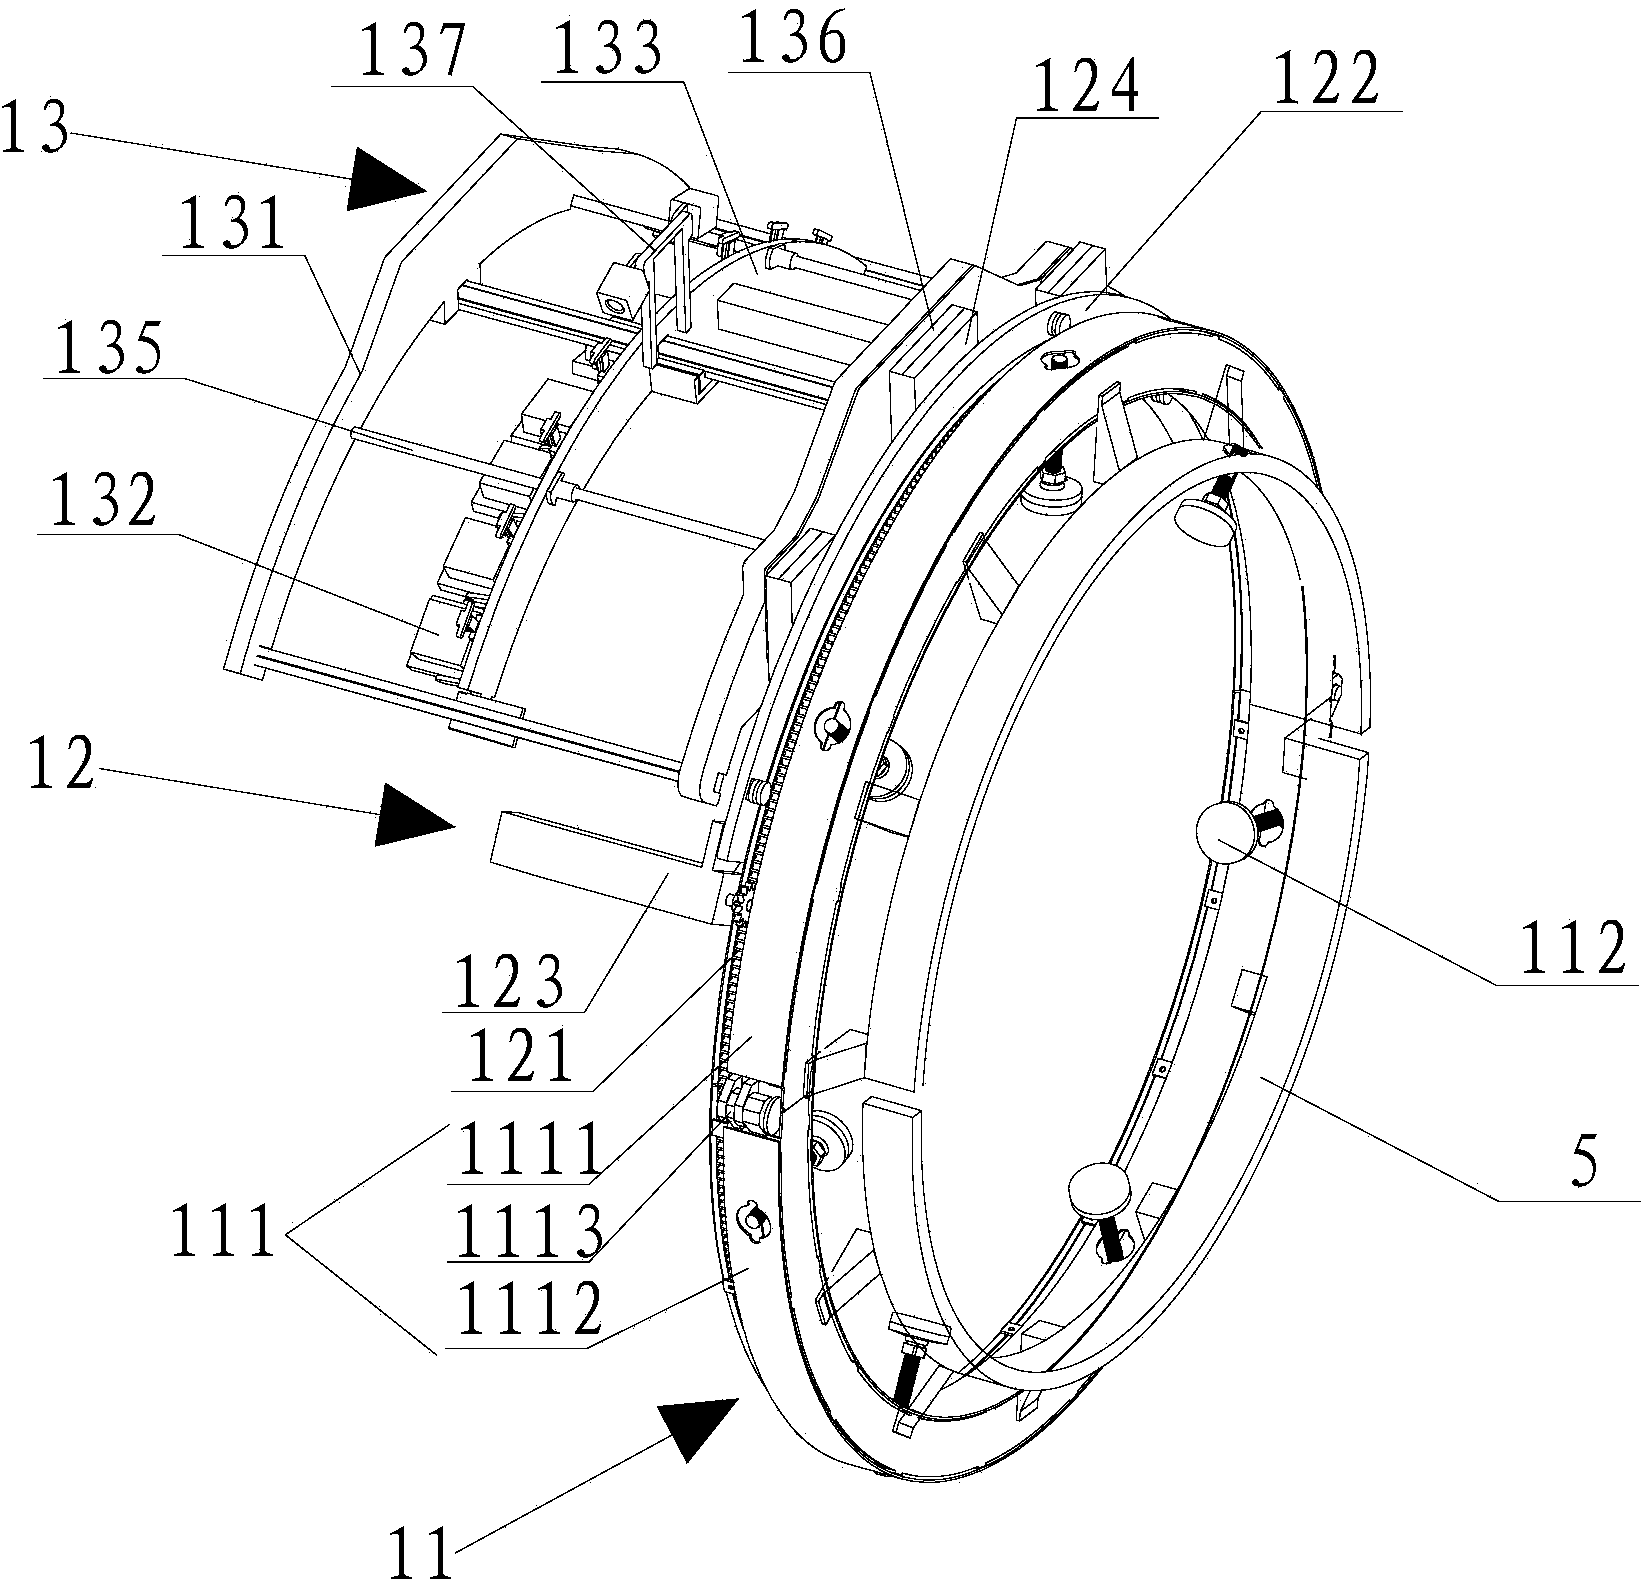 Ultrasonic automatic scanning device for large-aperture pipeline in nuclear power plant